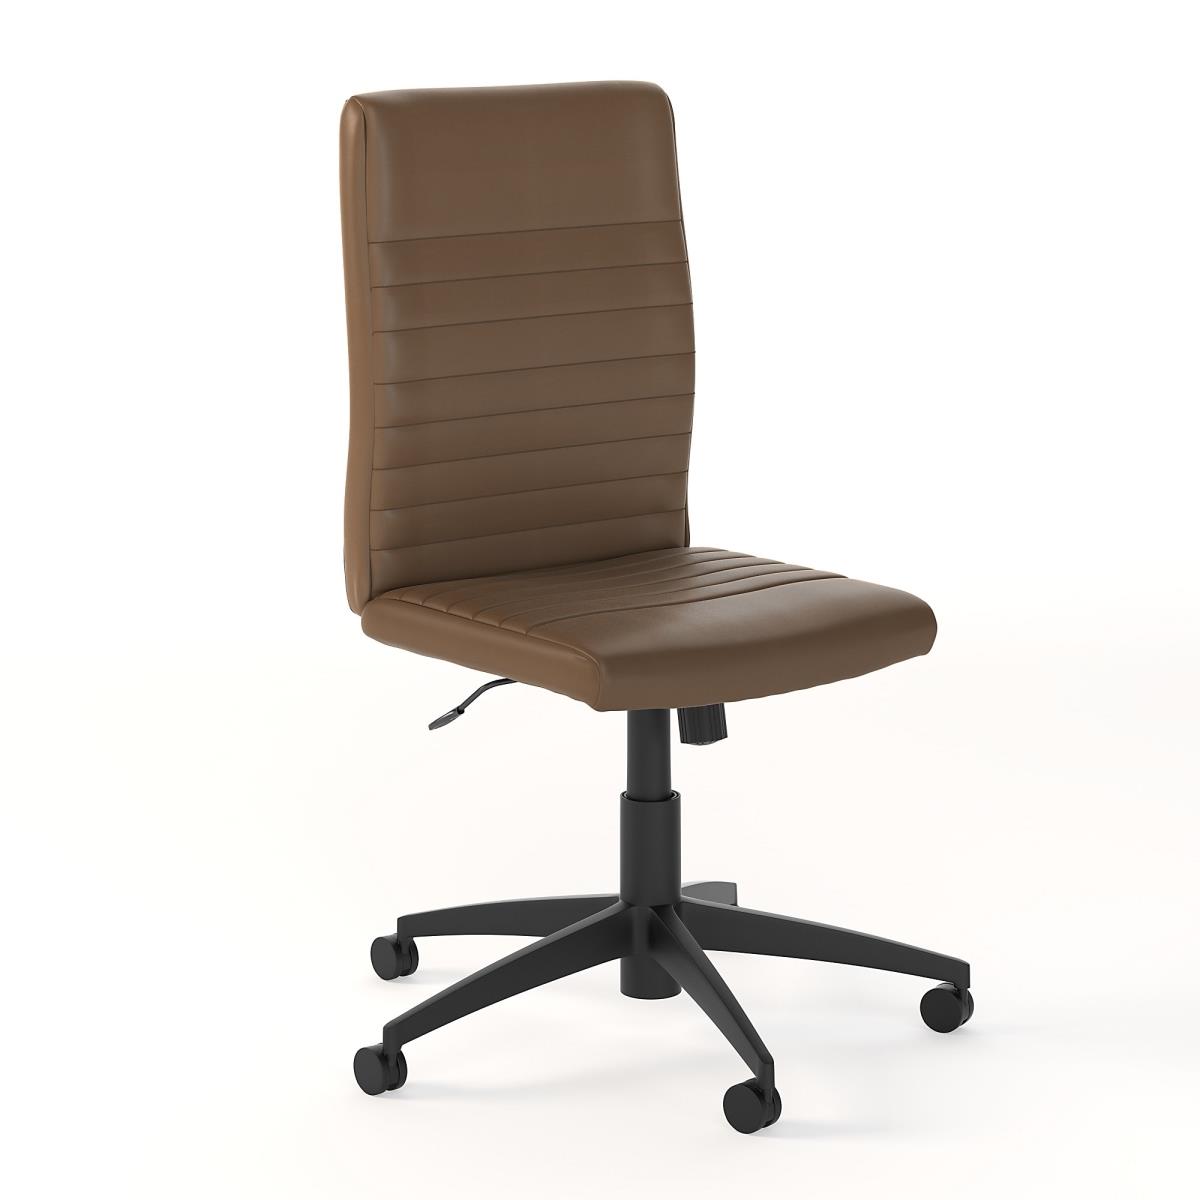 Ch2601sdl-03 Archive Mid Back Ribbed Leather Office Chair - Saddle Leather